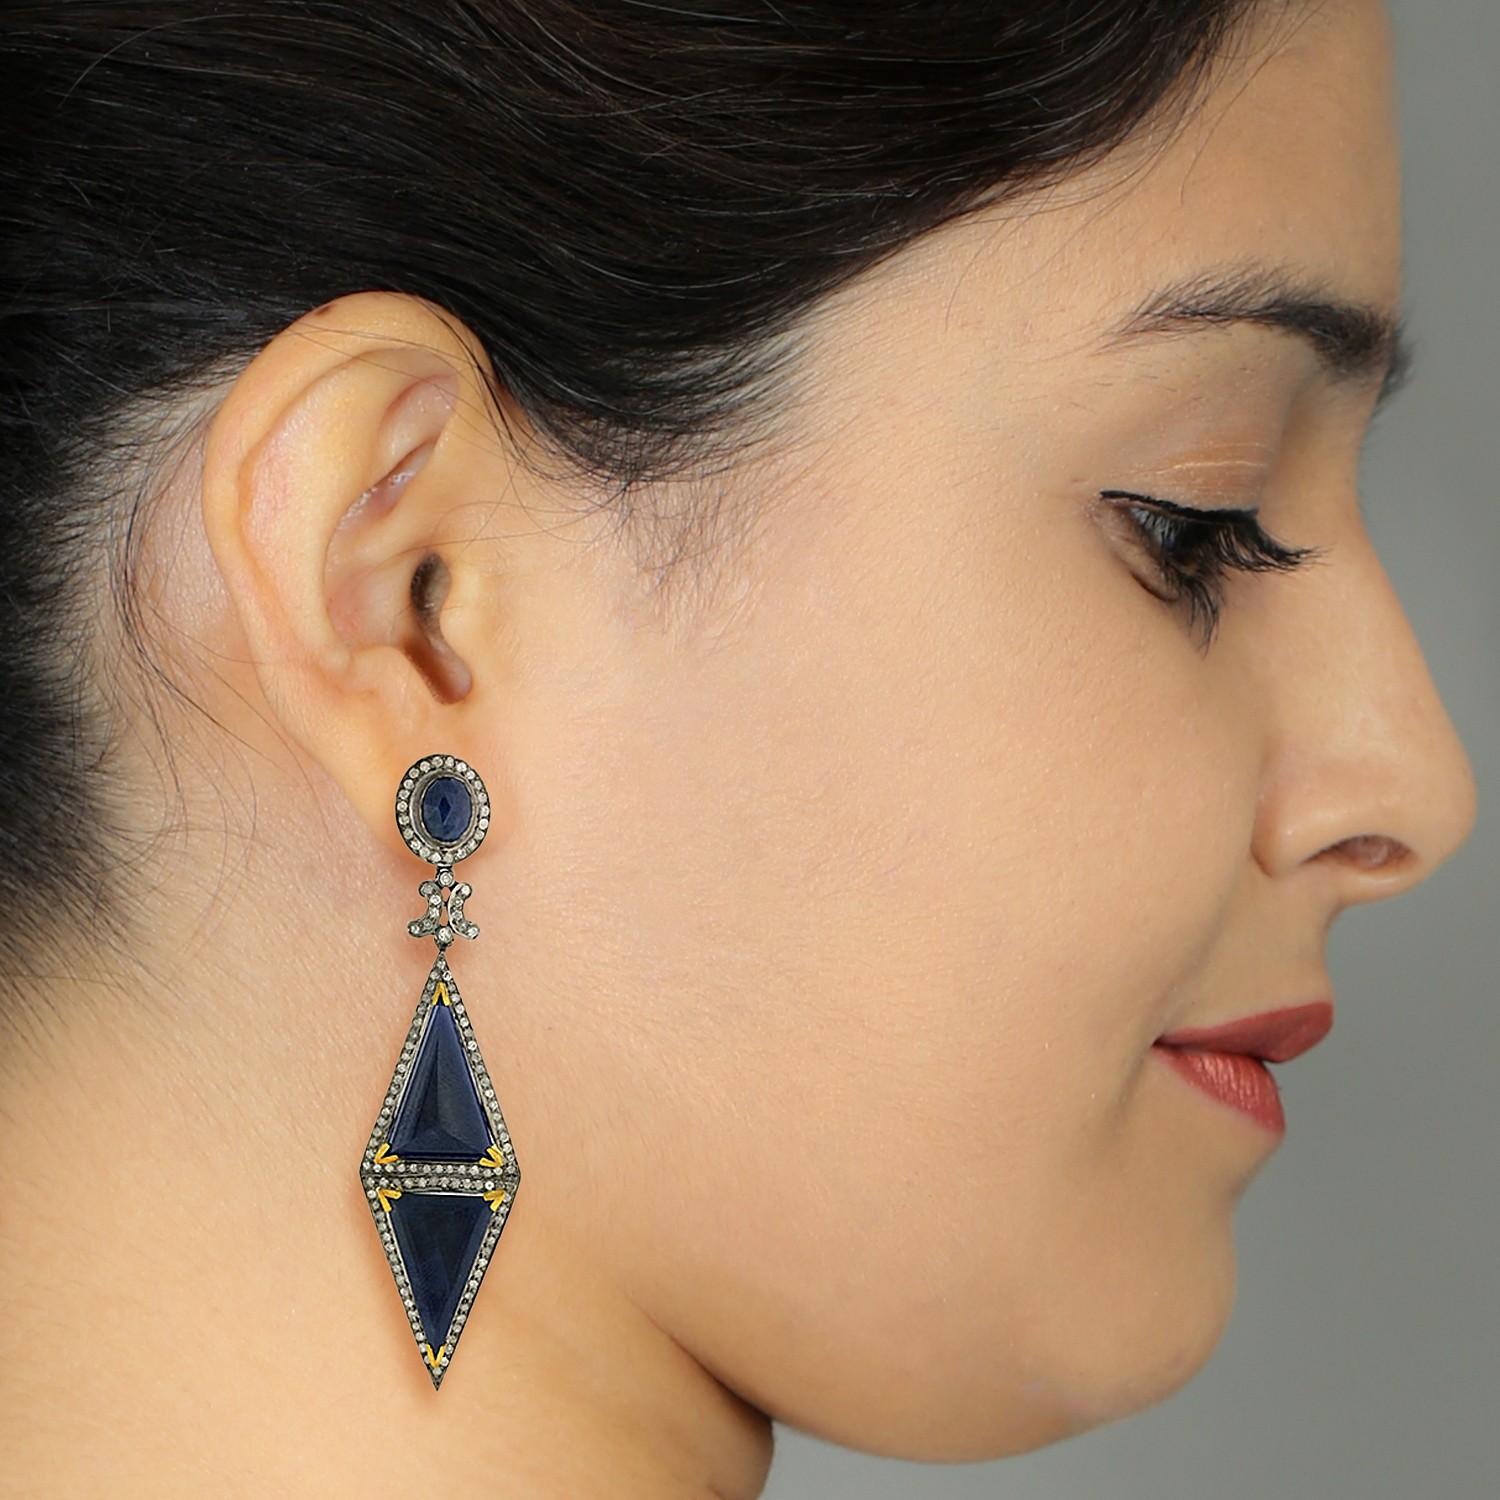 Art Deco Rhombus Shaped Blue Sapphire Earrings with Pave Diamonds in 18k Gold & Silver For Sale